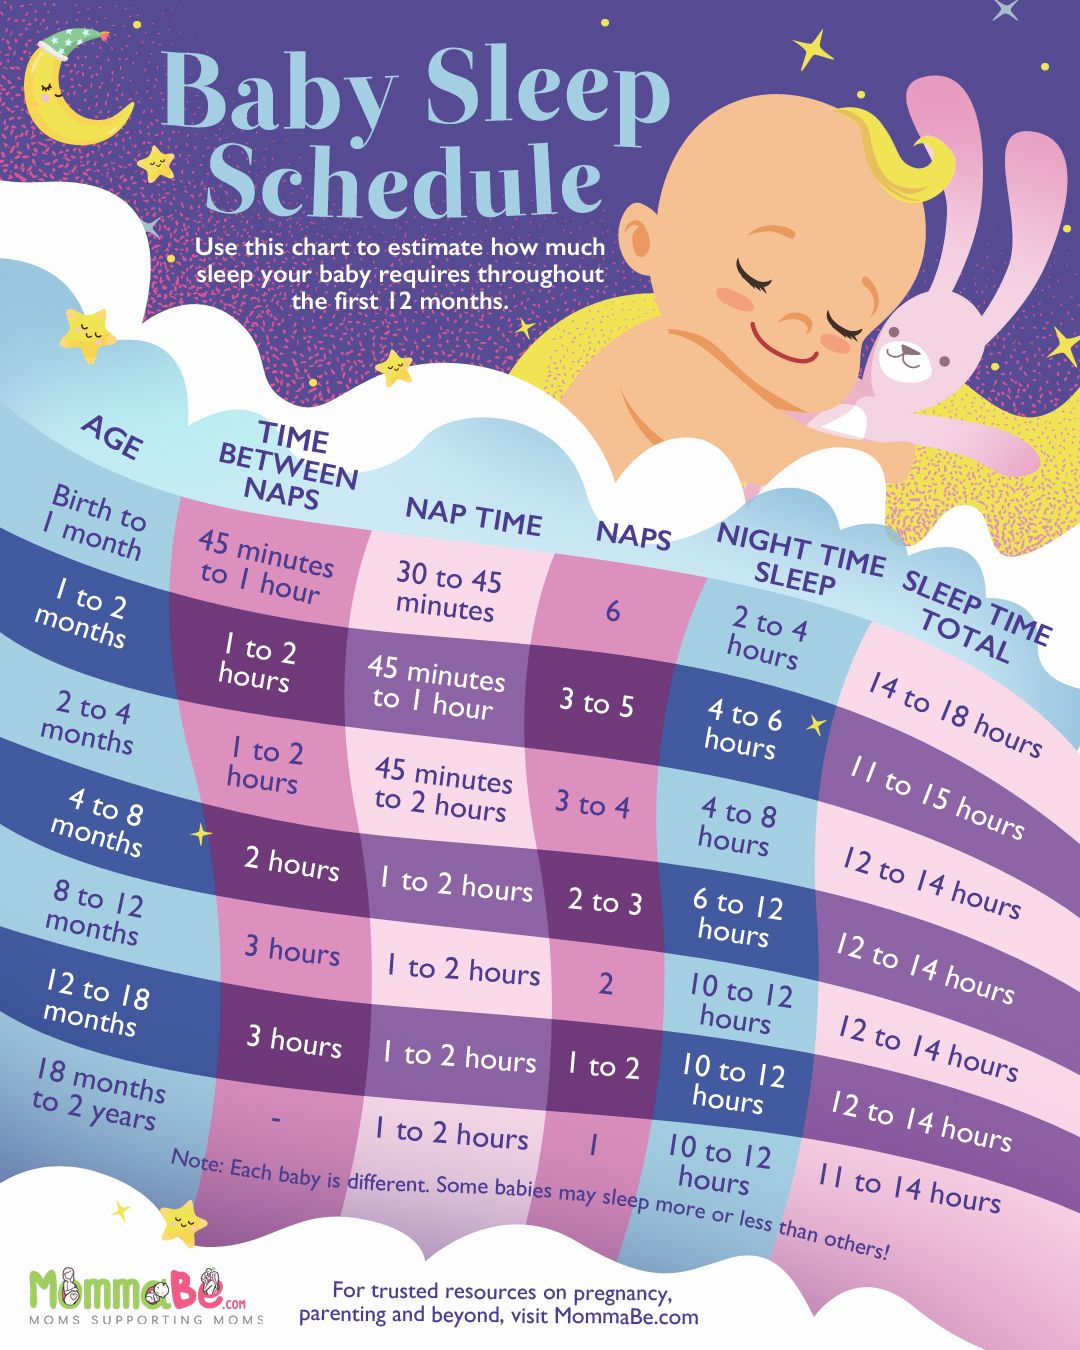 Ensure Your Little One Gets Proper Rest With This Baby Sleep Schedule ...